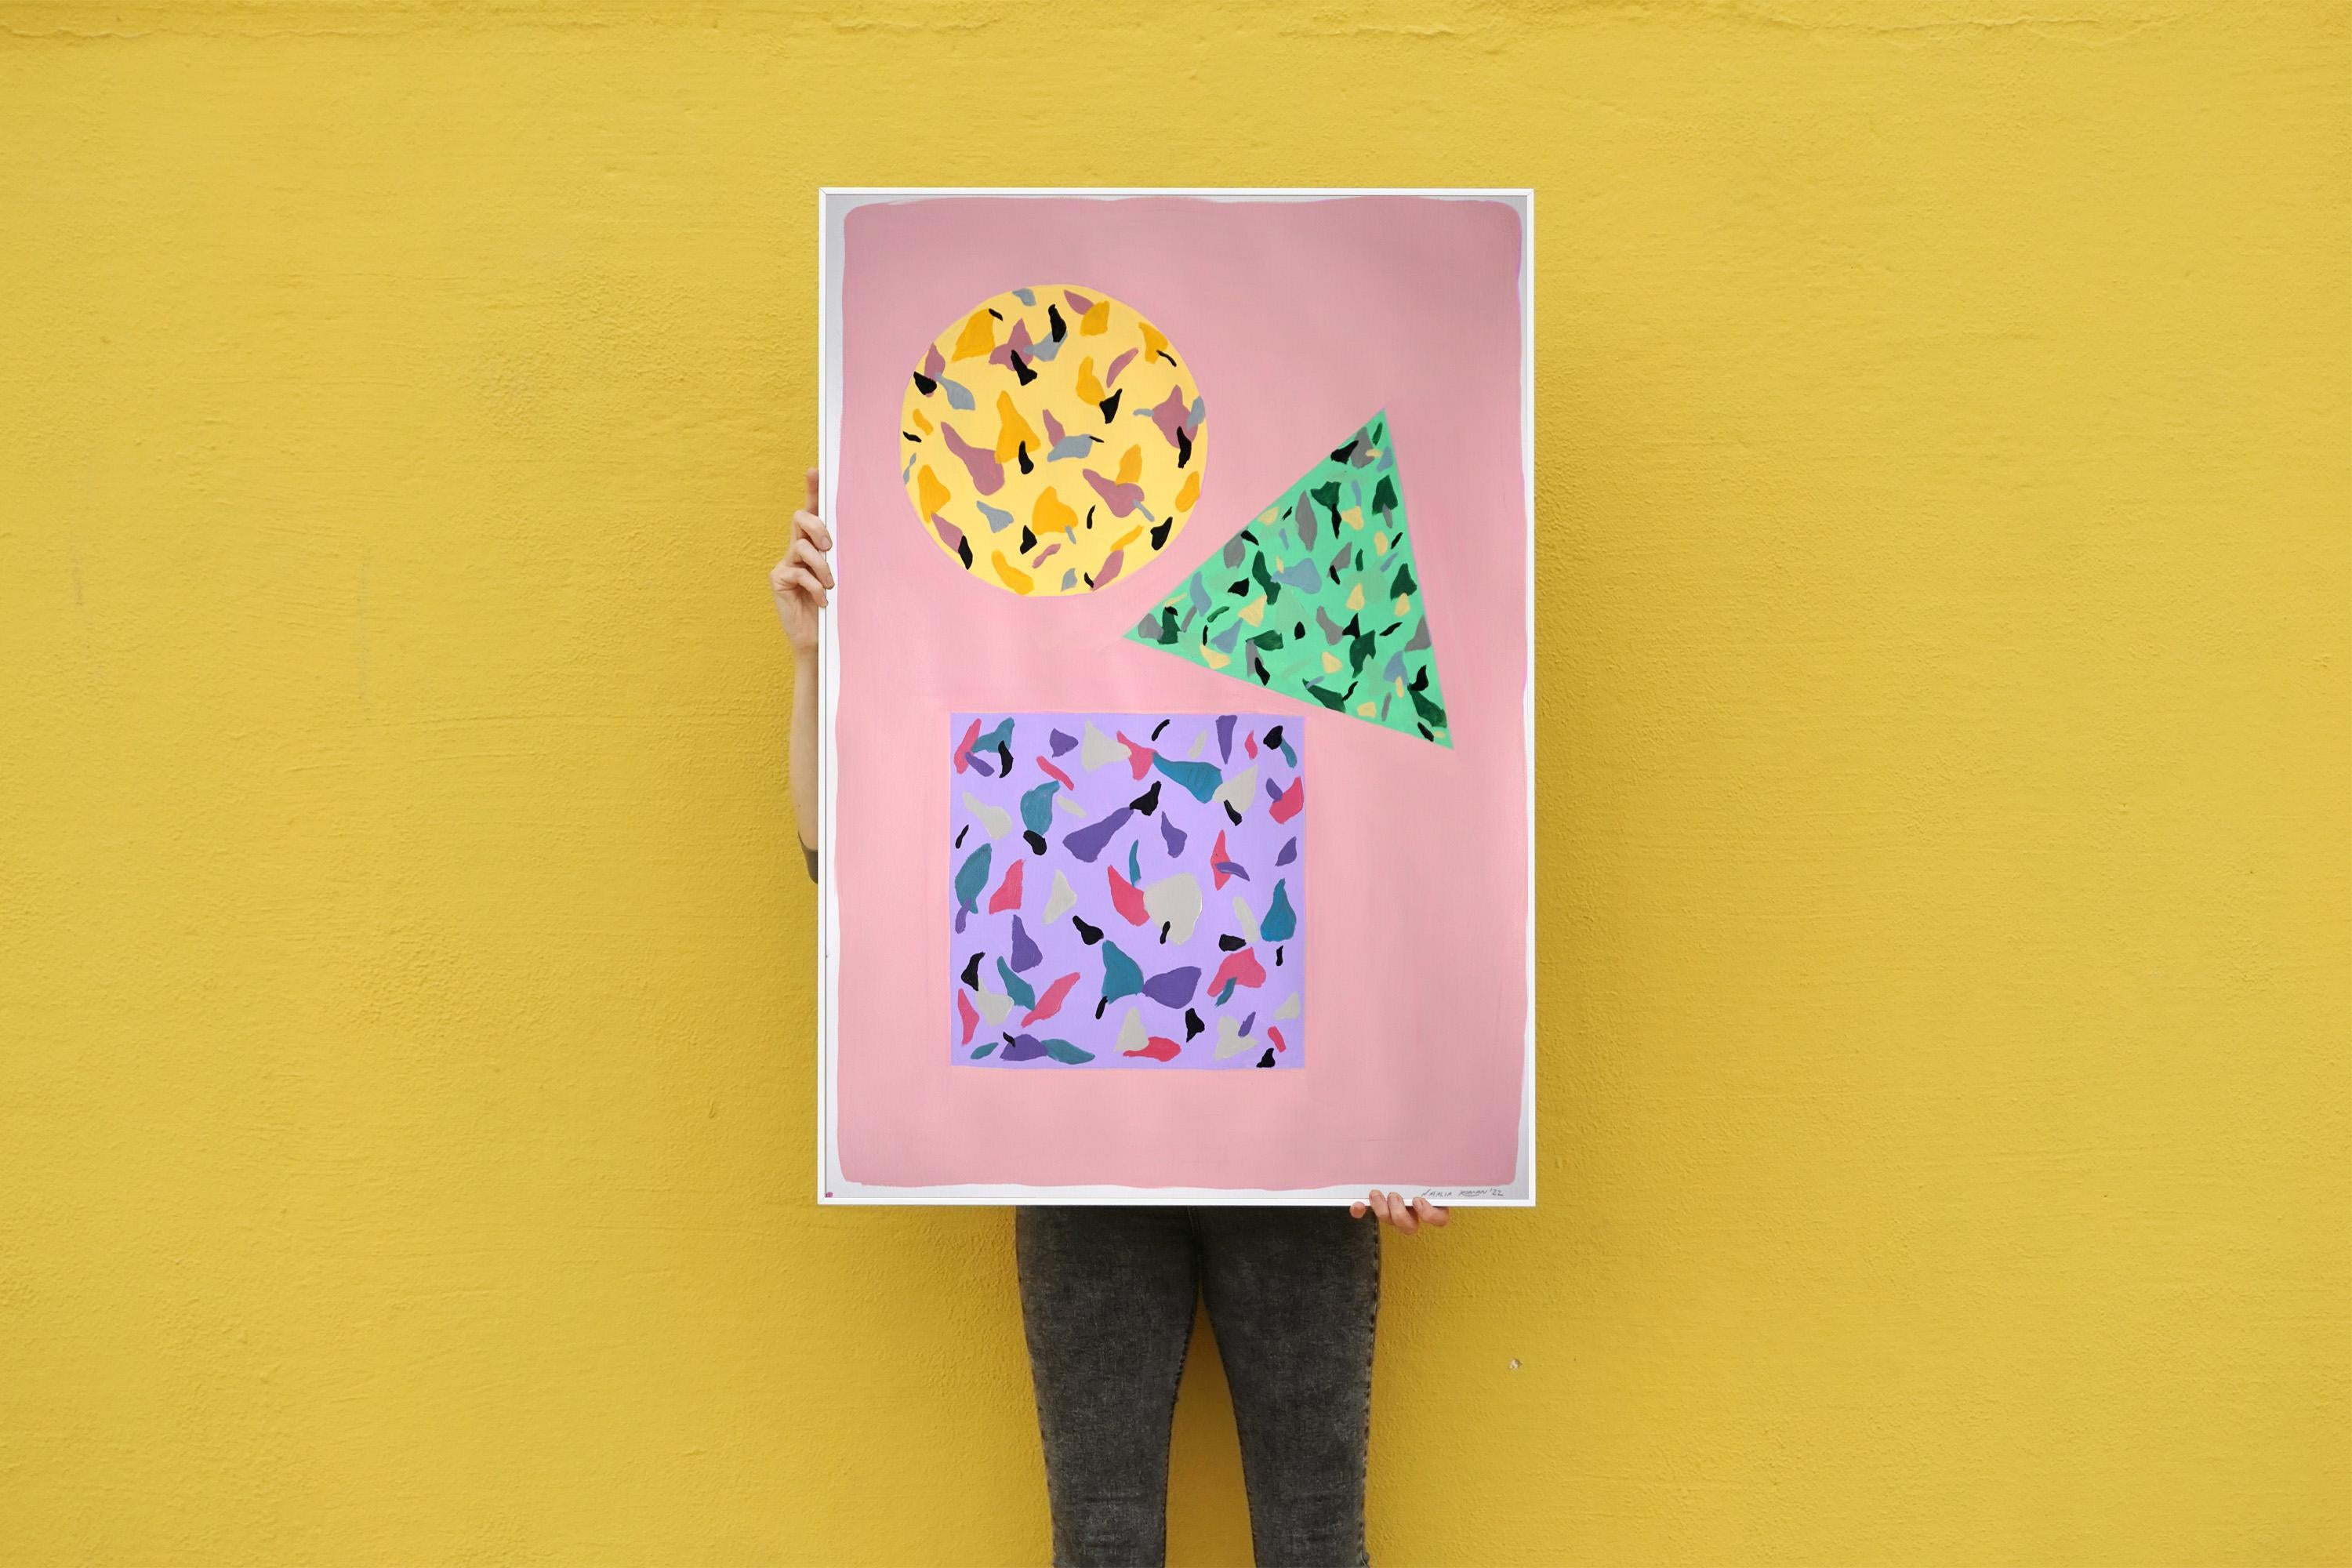 Square, Circle and Triangle Tiles in Pink and Yellow, Floating Geometry on Paper - Painting by Natalia Roman